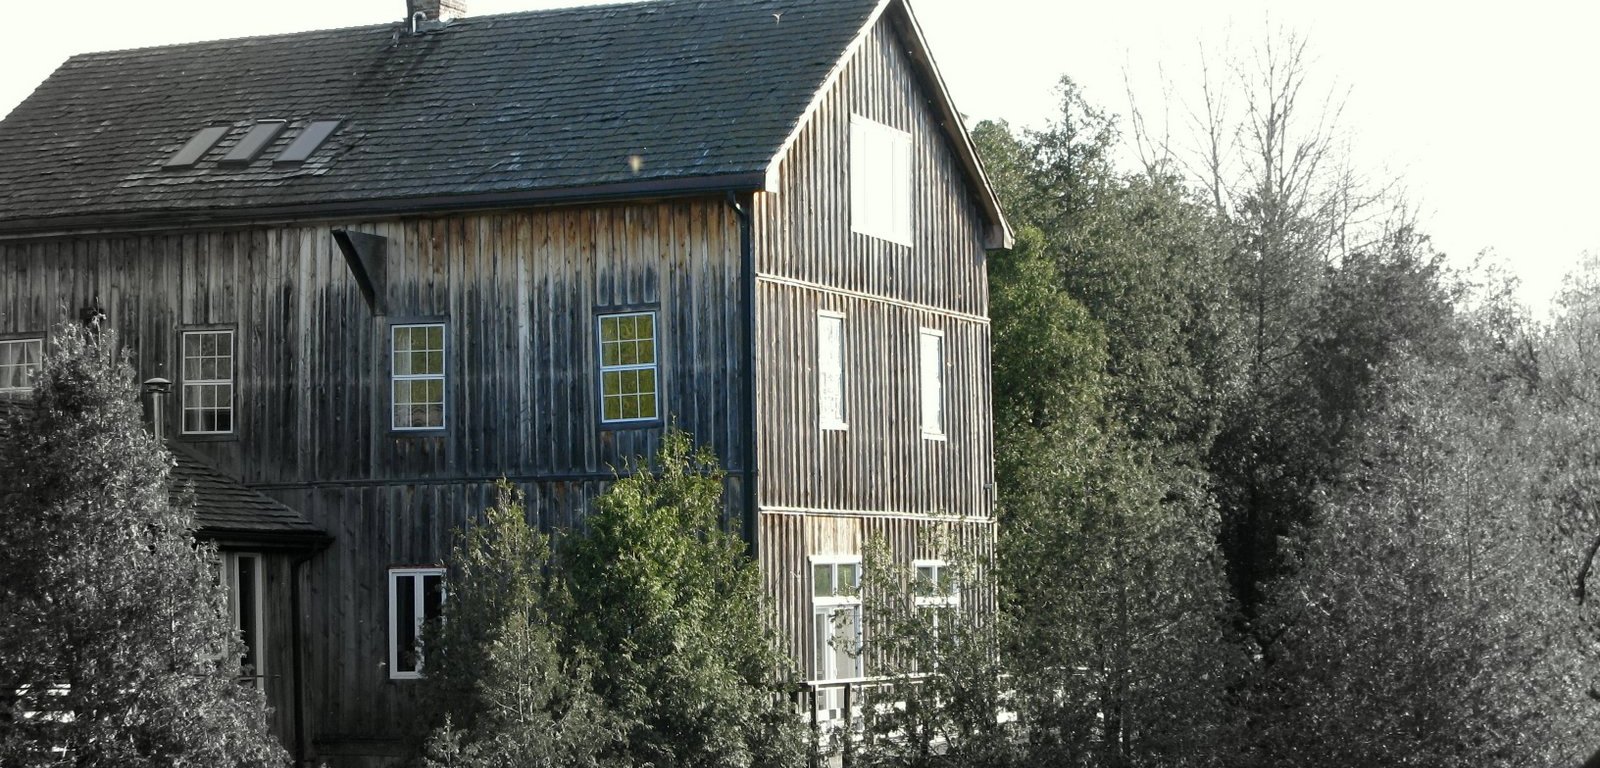 The Old Traverston Mill